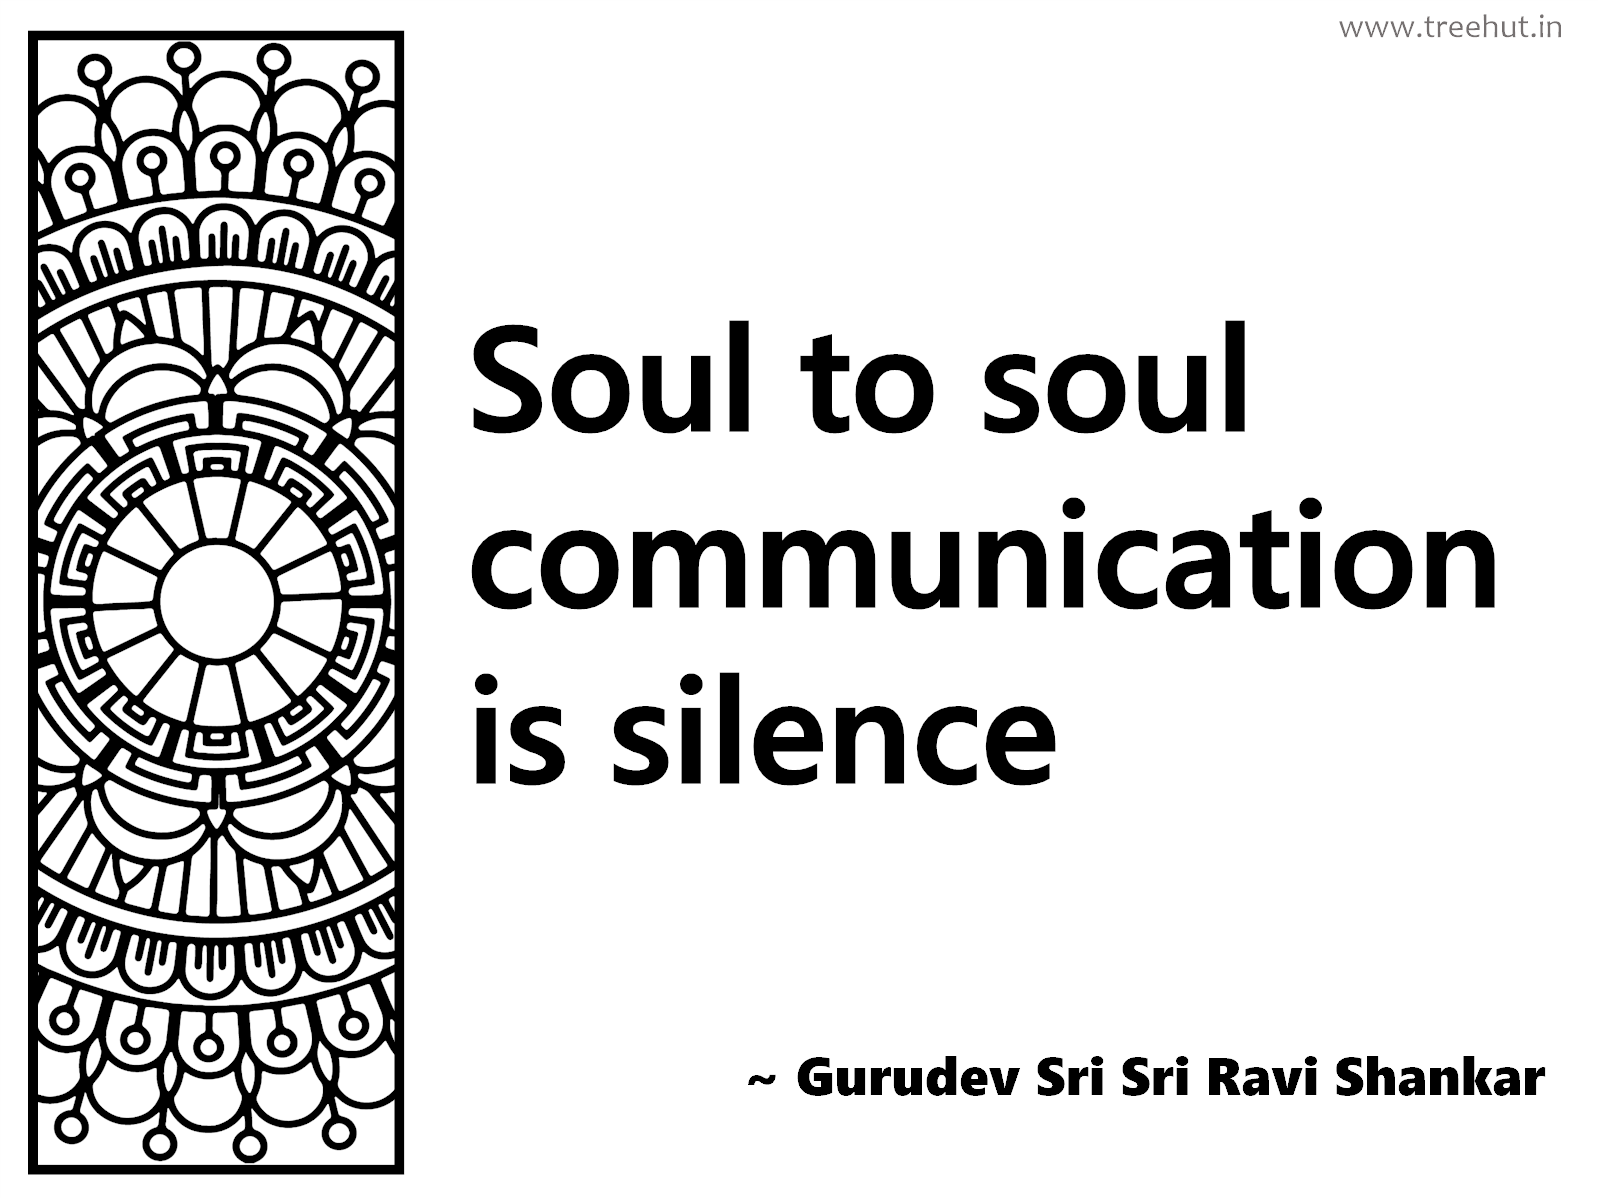 Soul to soul communication is silence Inspirational Quote by Gurudev Sri Sri Ravi Shankar, coloring pages